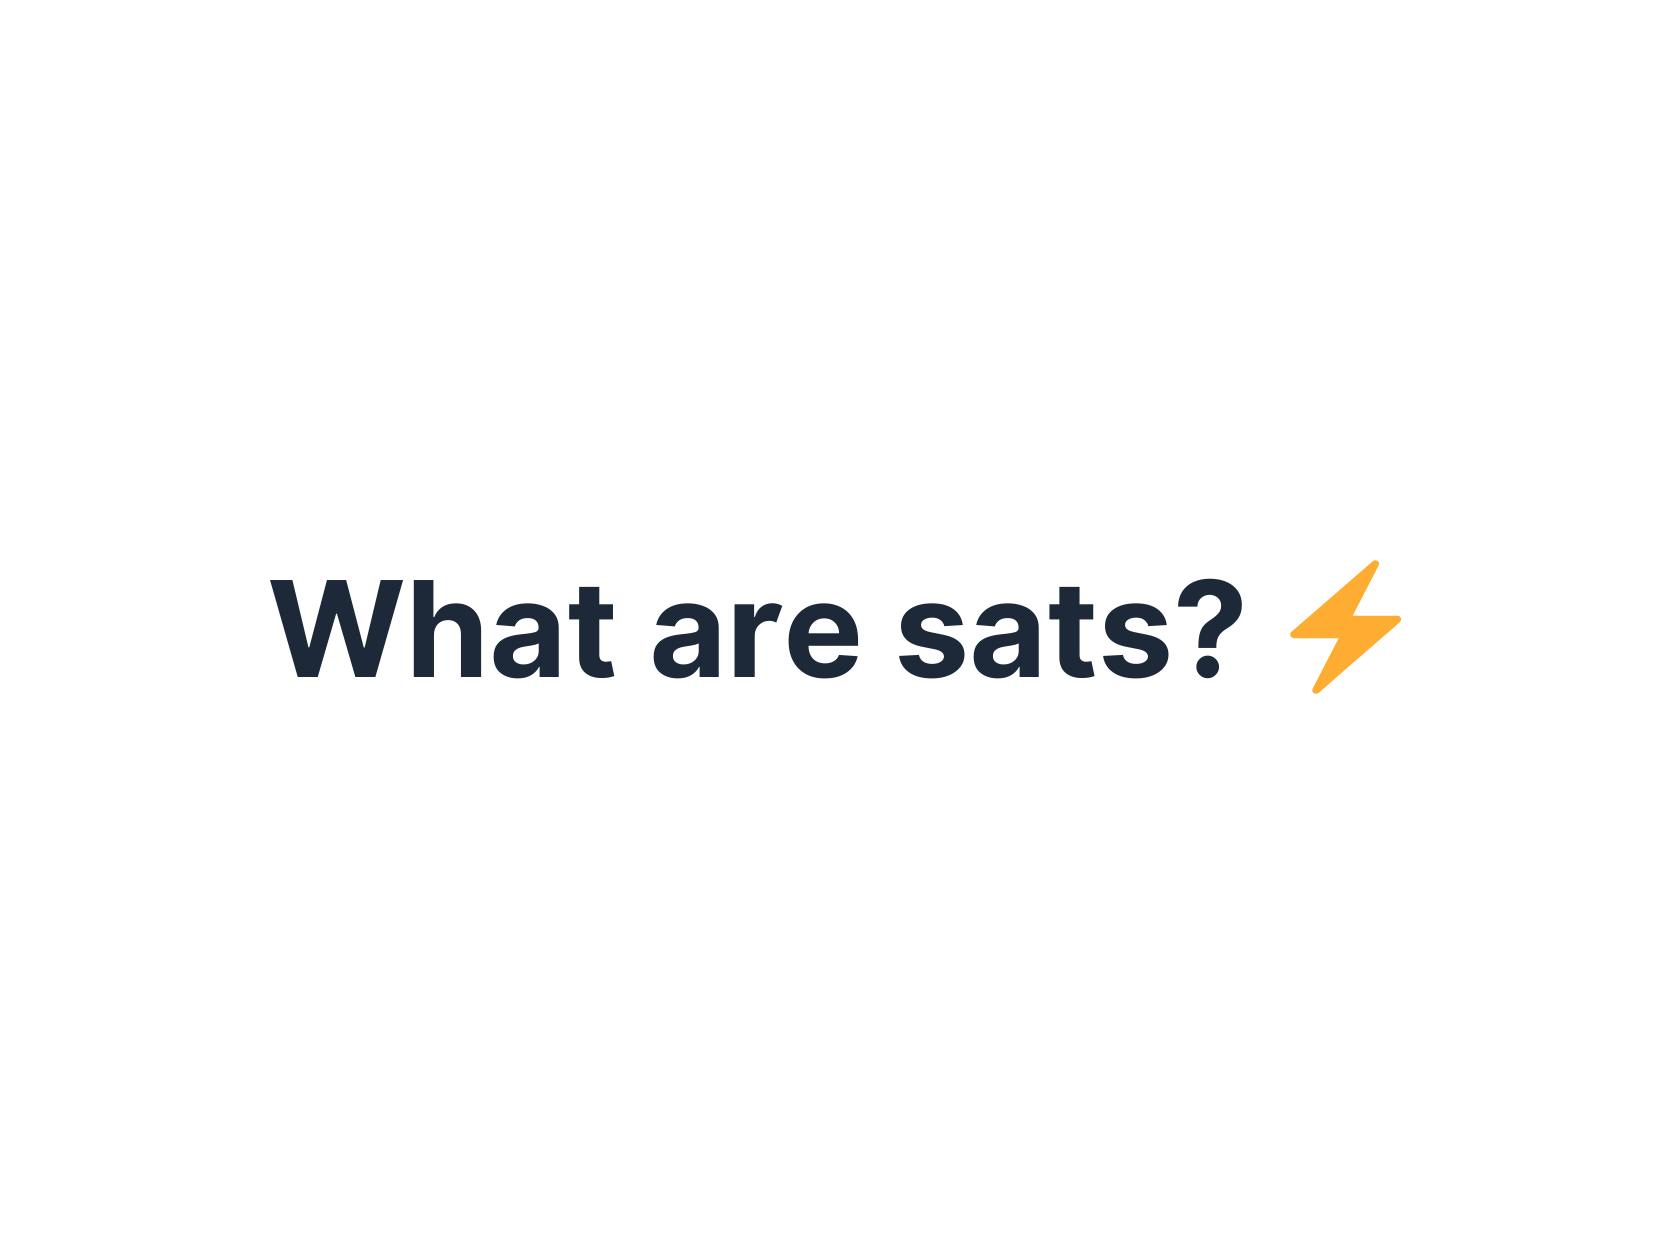 What are sats?